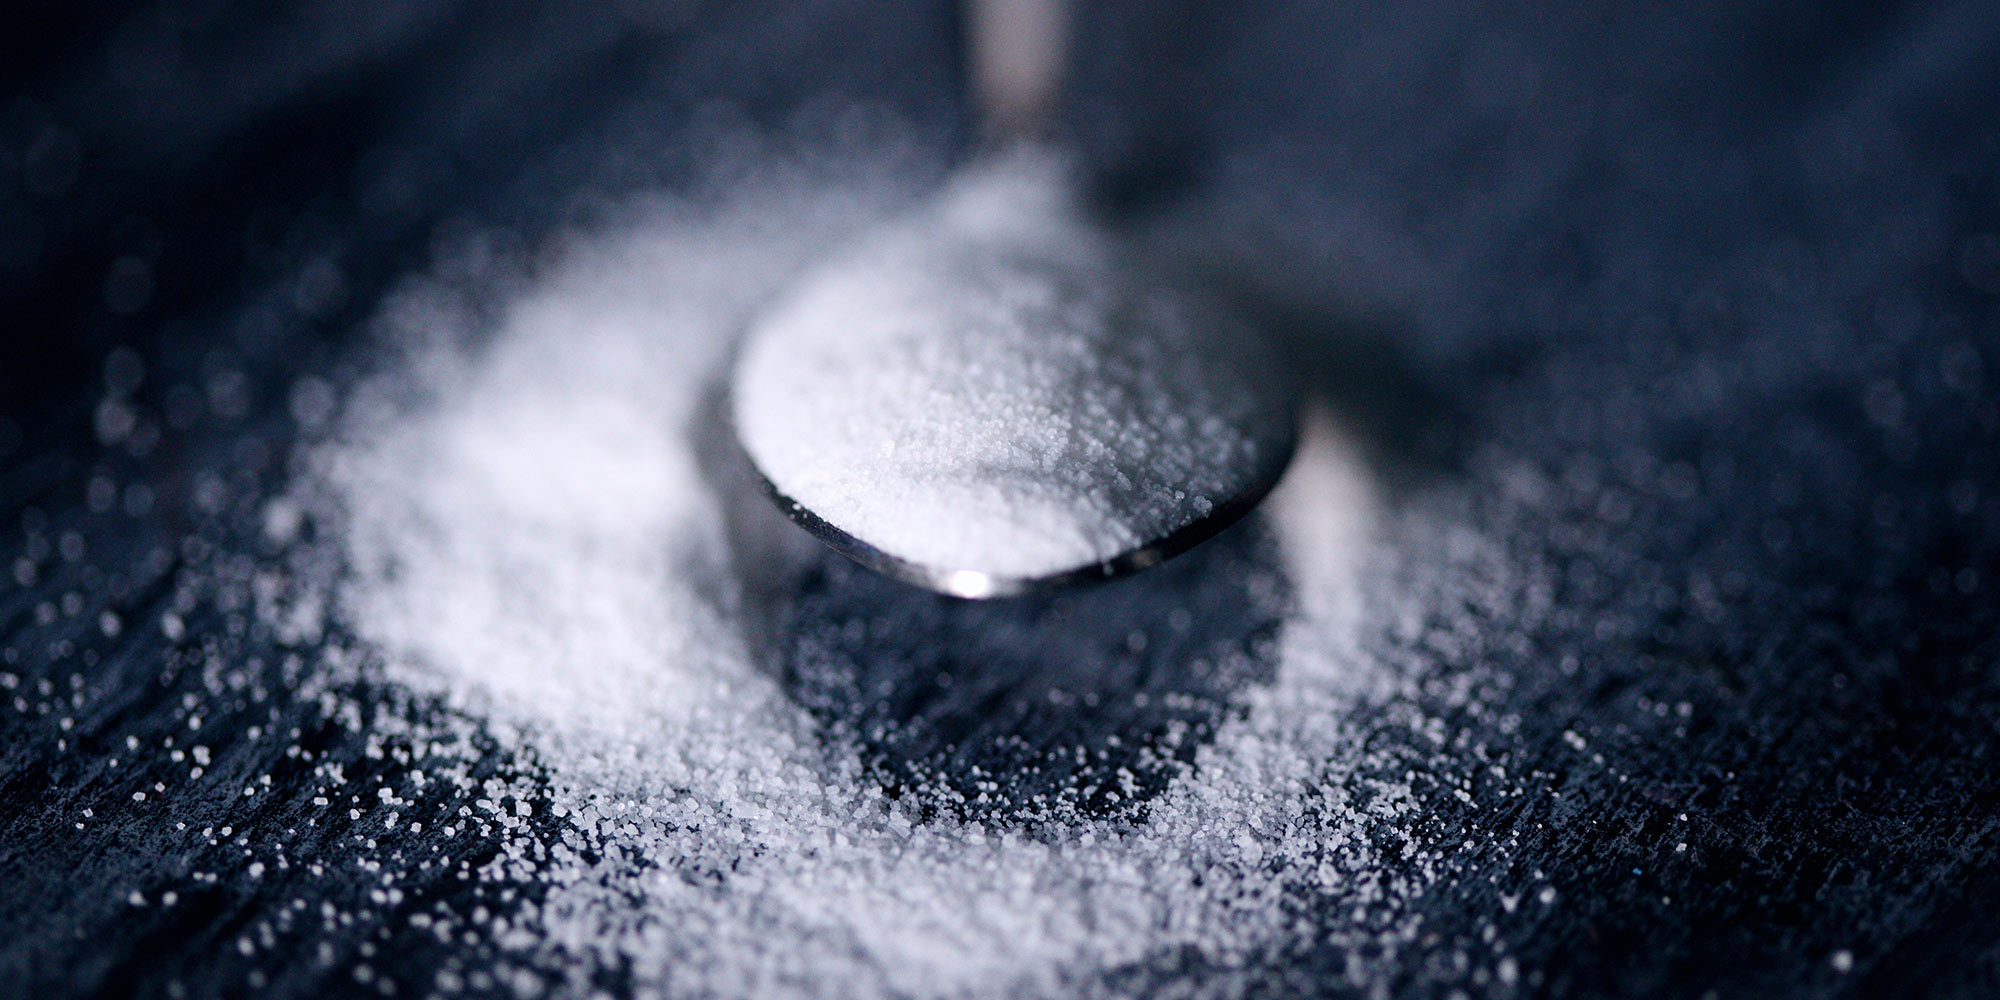 Combat your sweet tooth with our tips on minimising sugar damage!